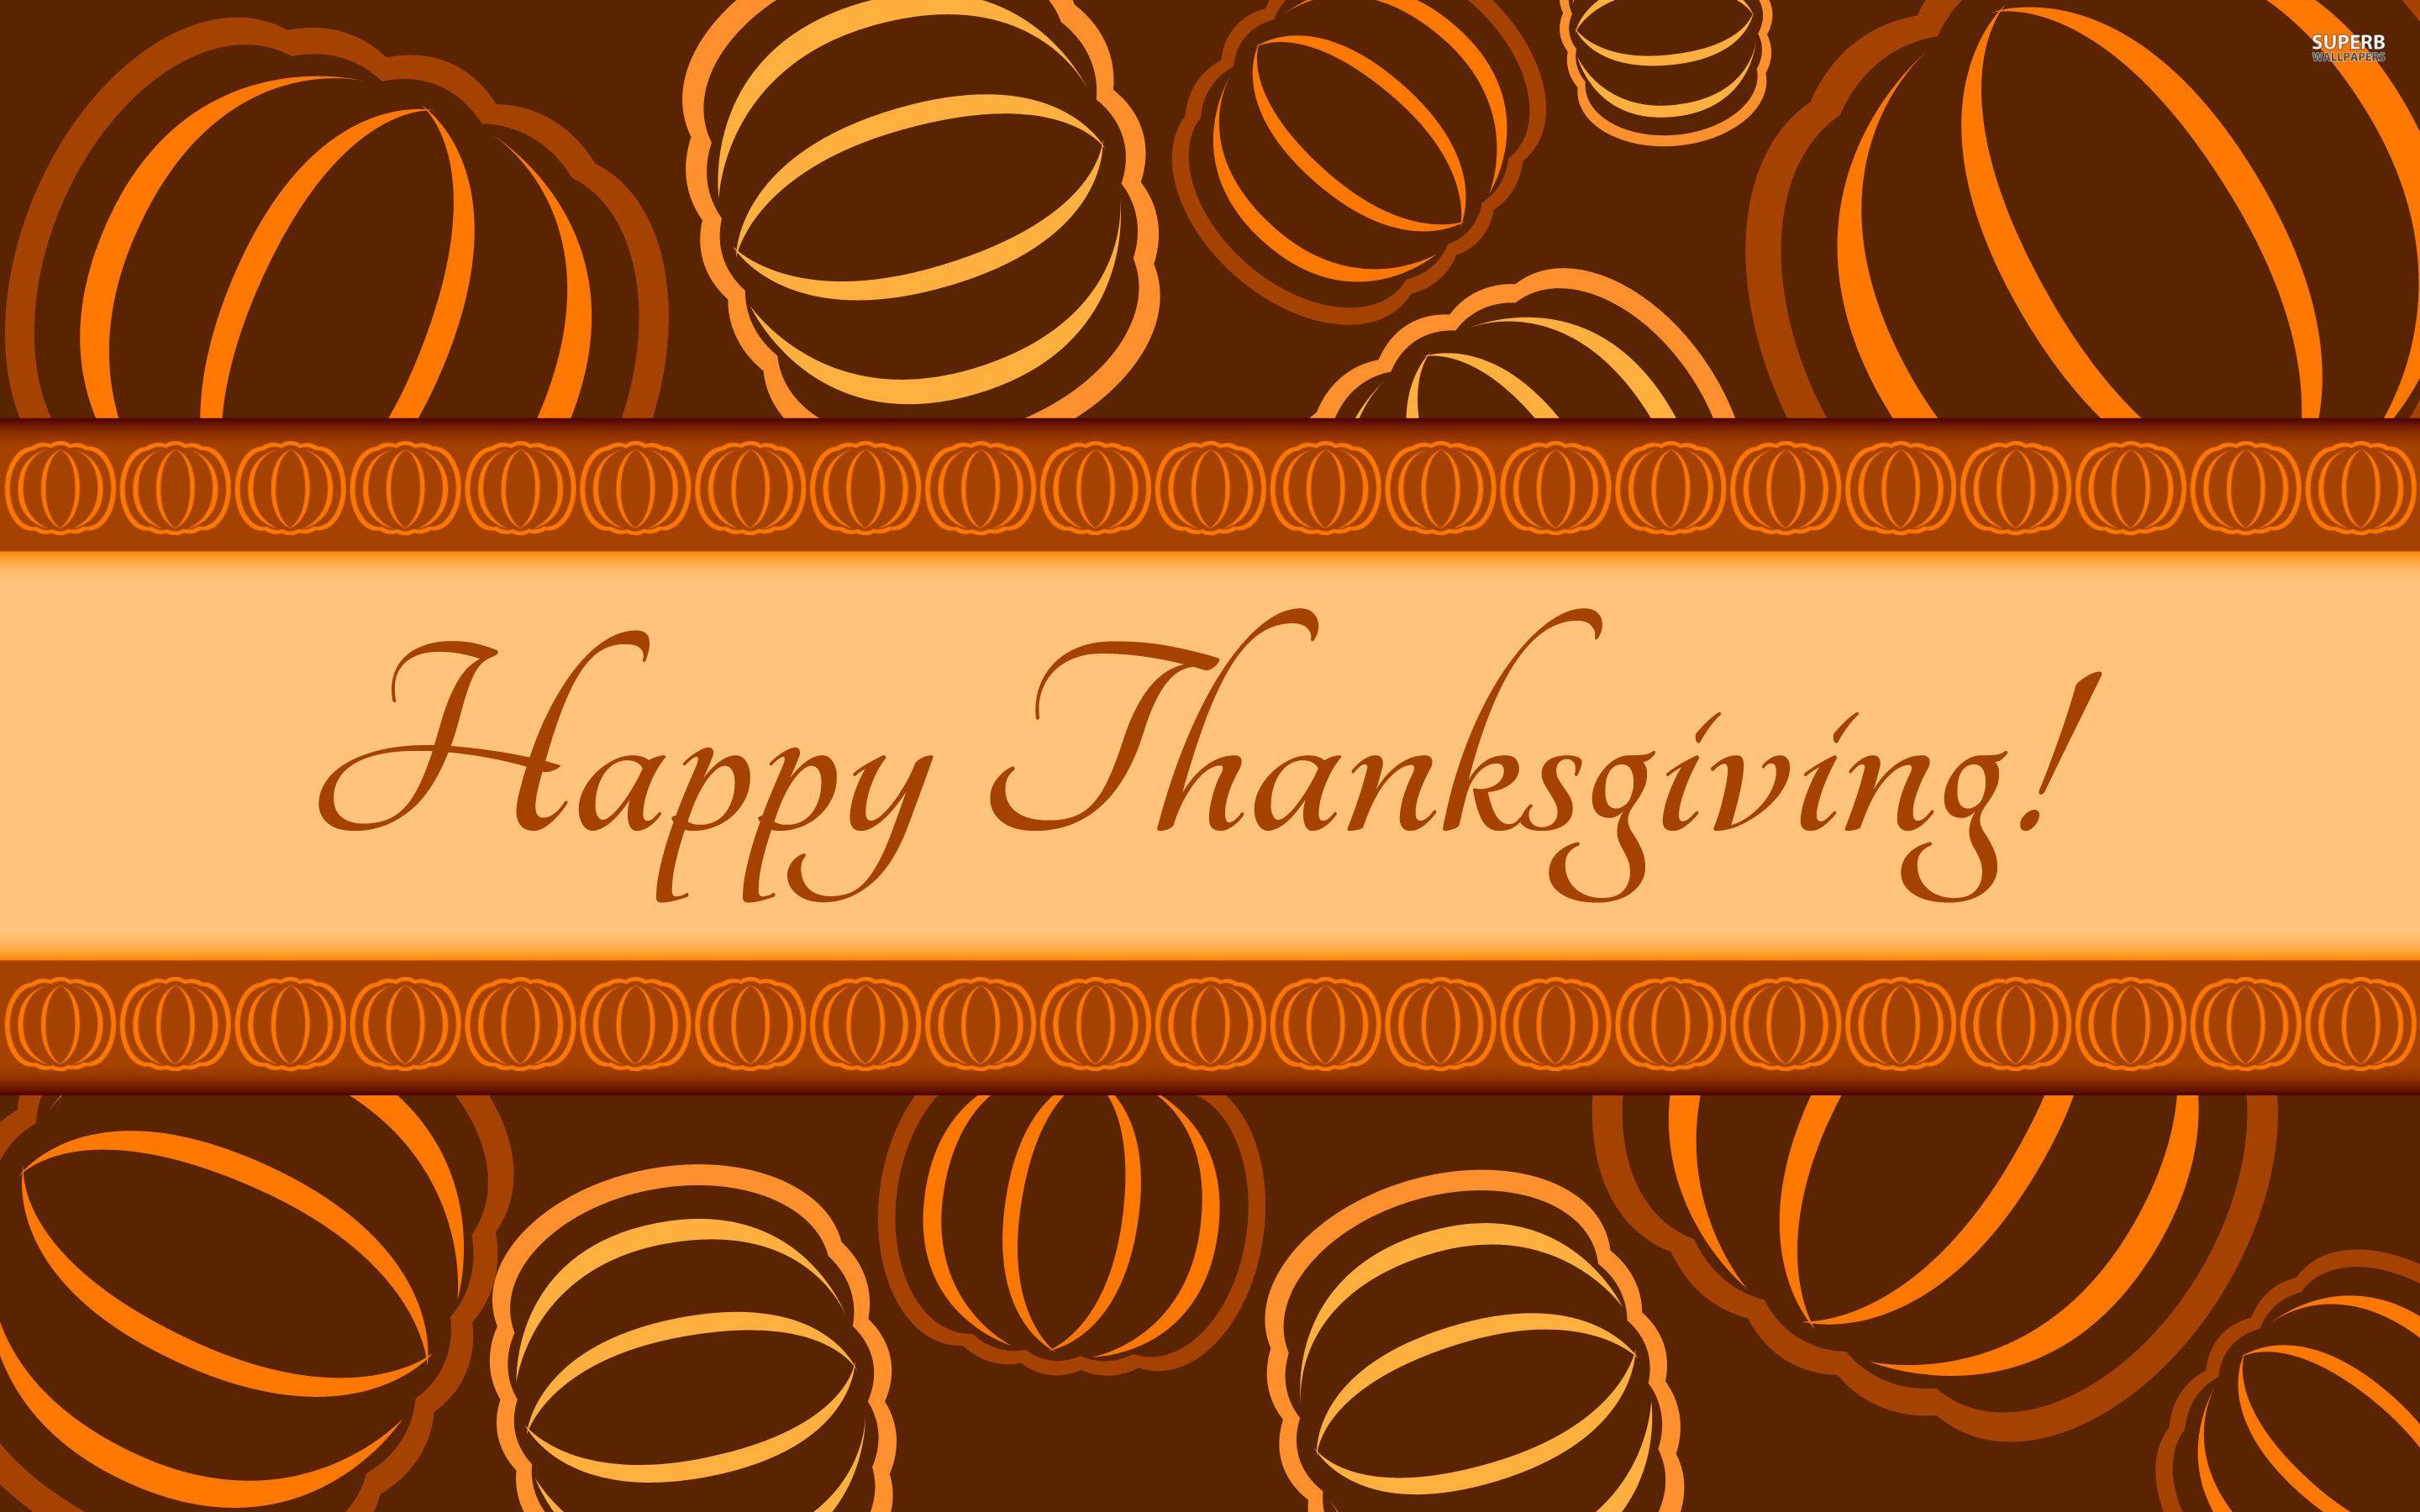 Thanksgiving Day Wallpaper Image Background Download. HD